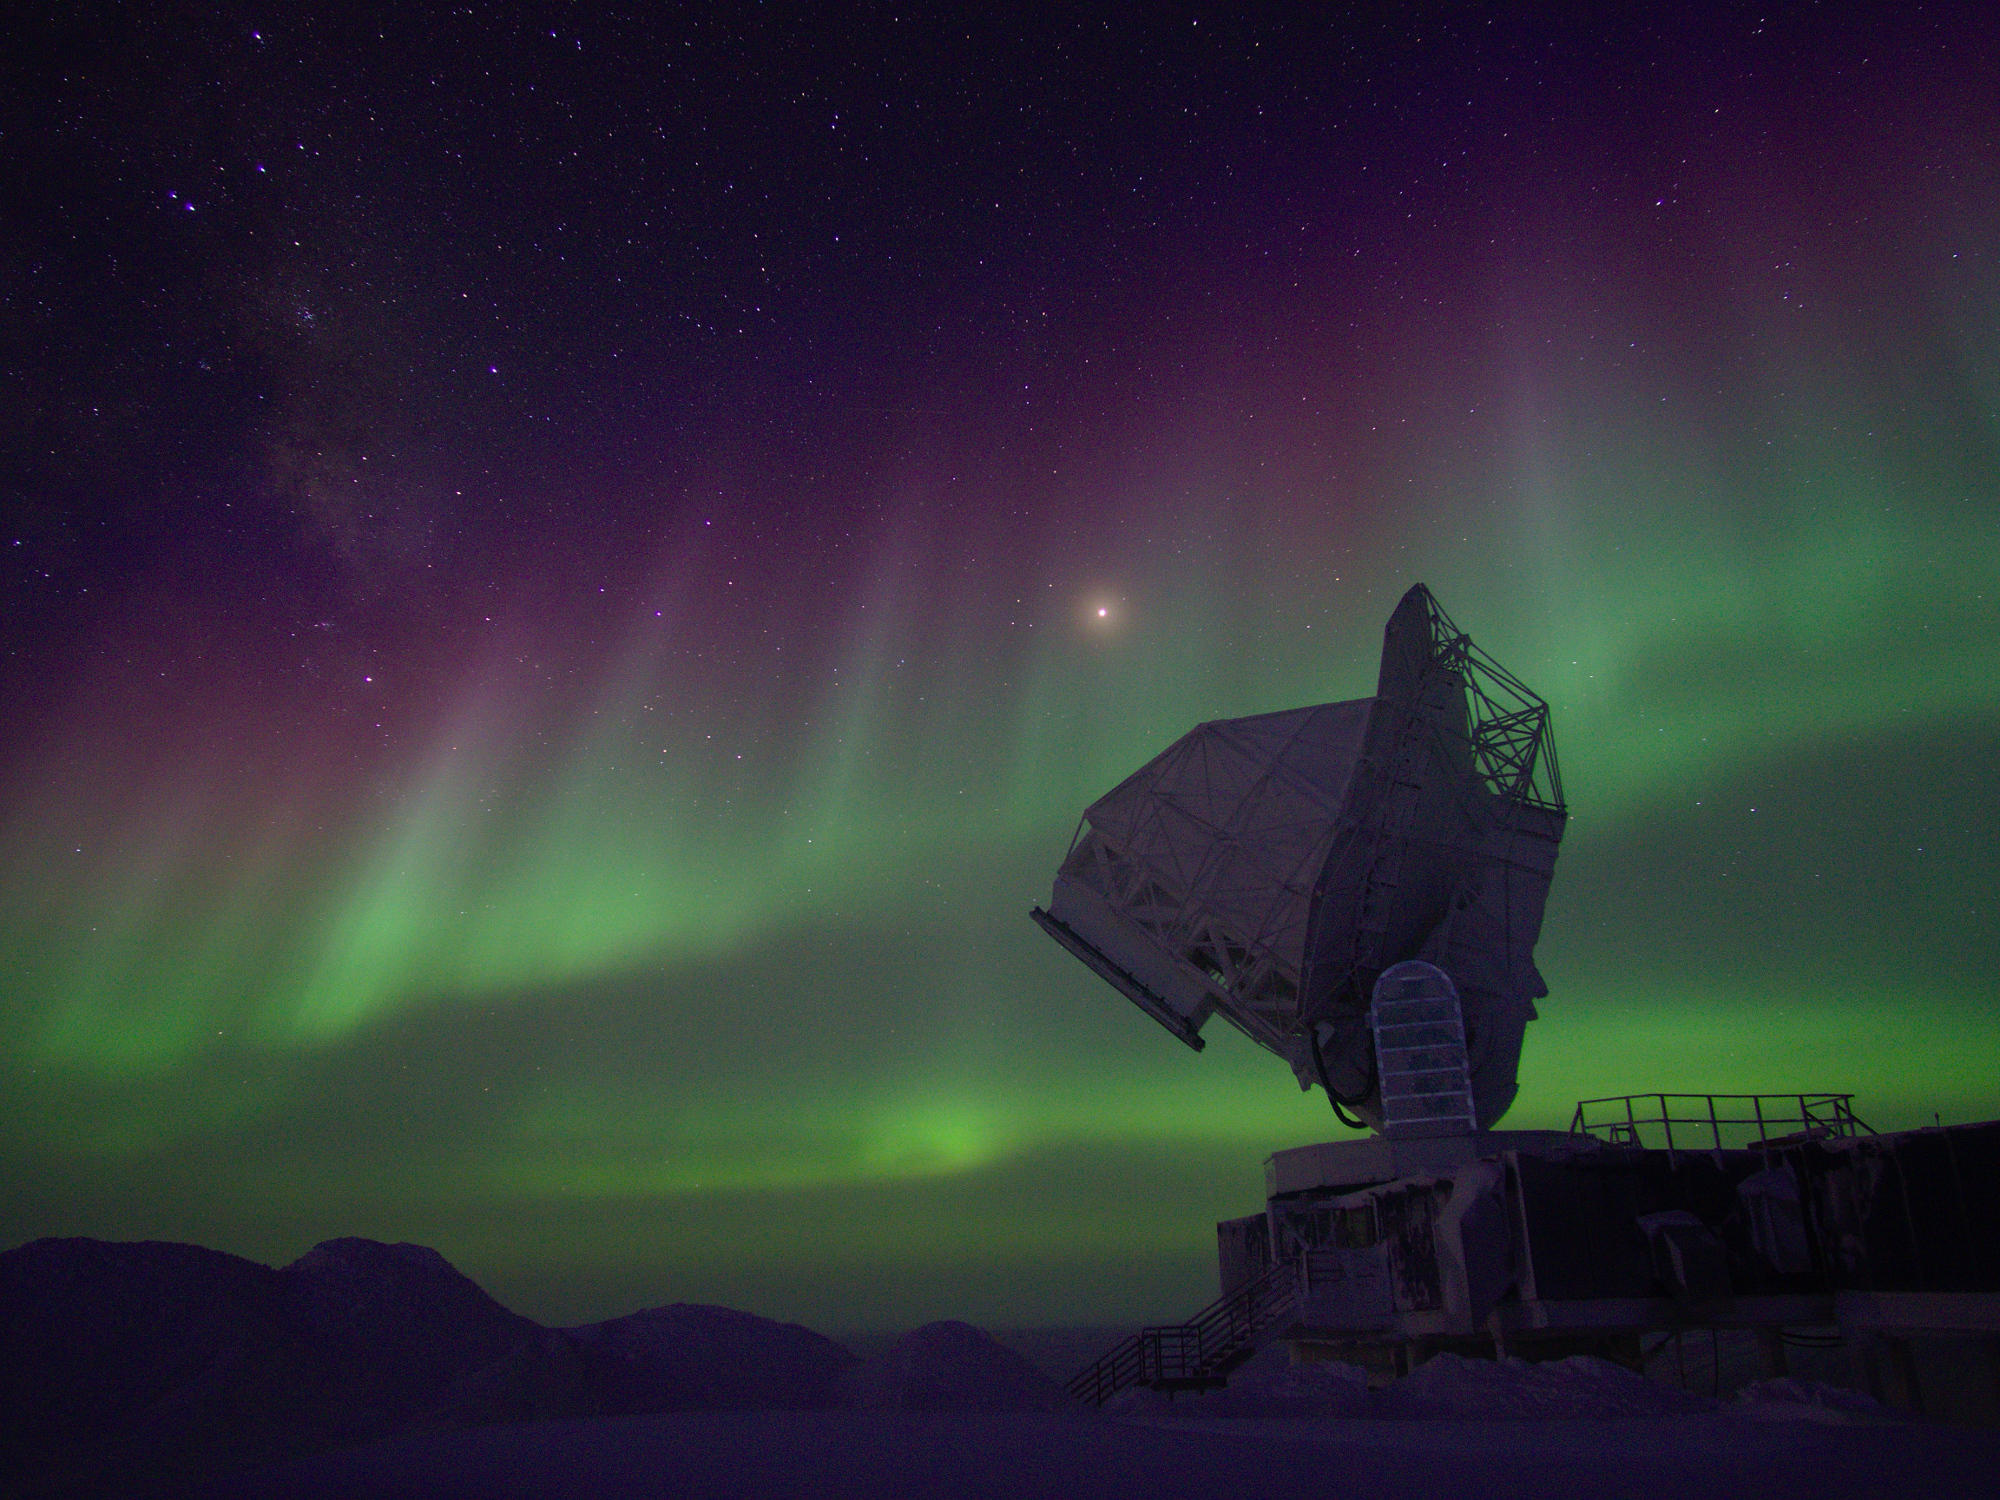 The South Pole Telescope observing under polar lights.